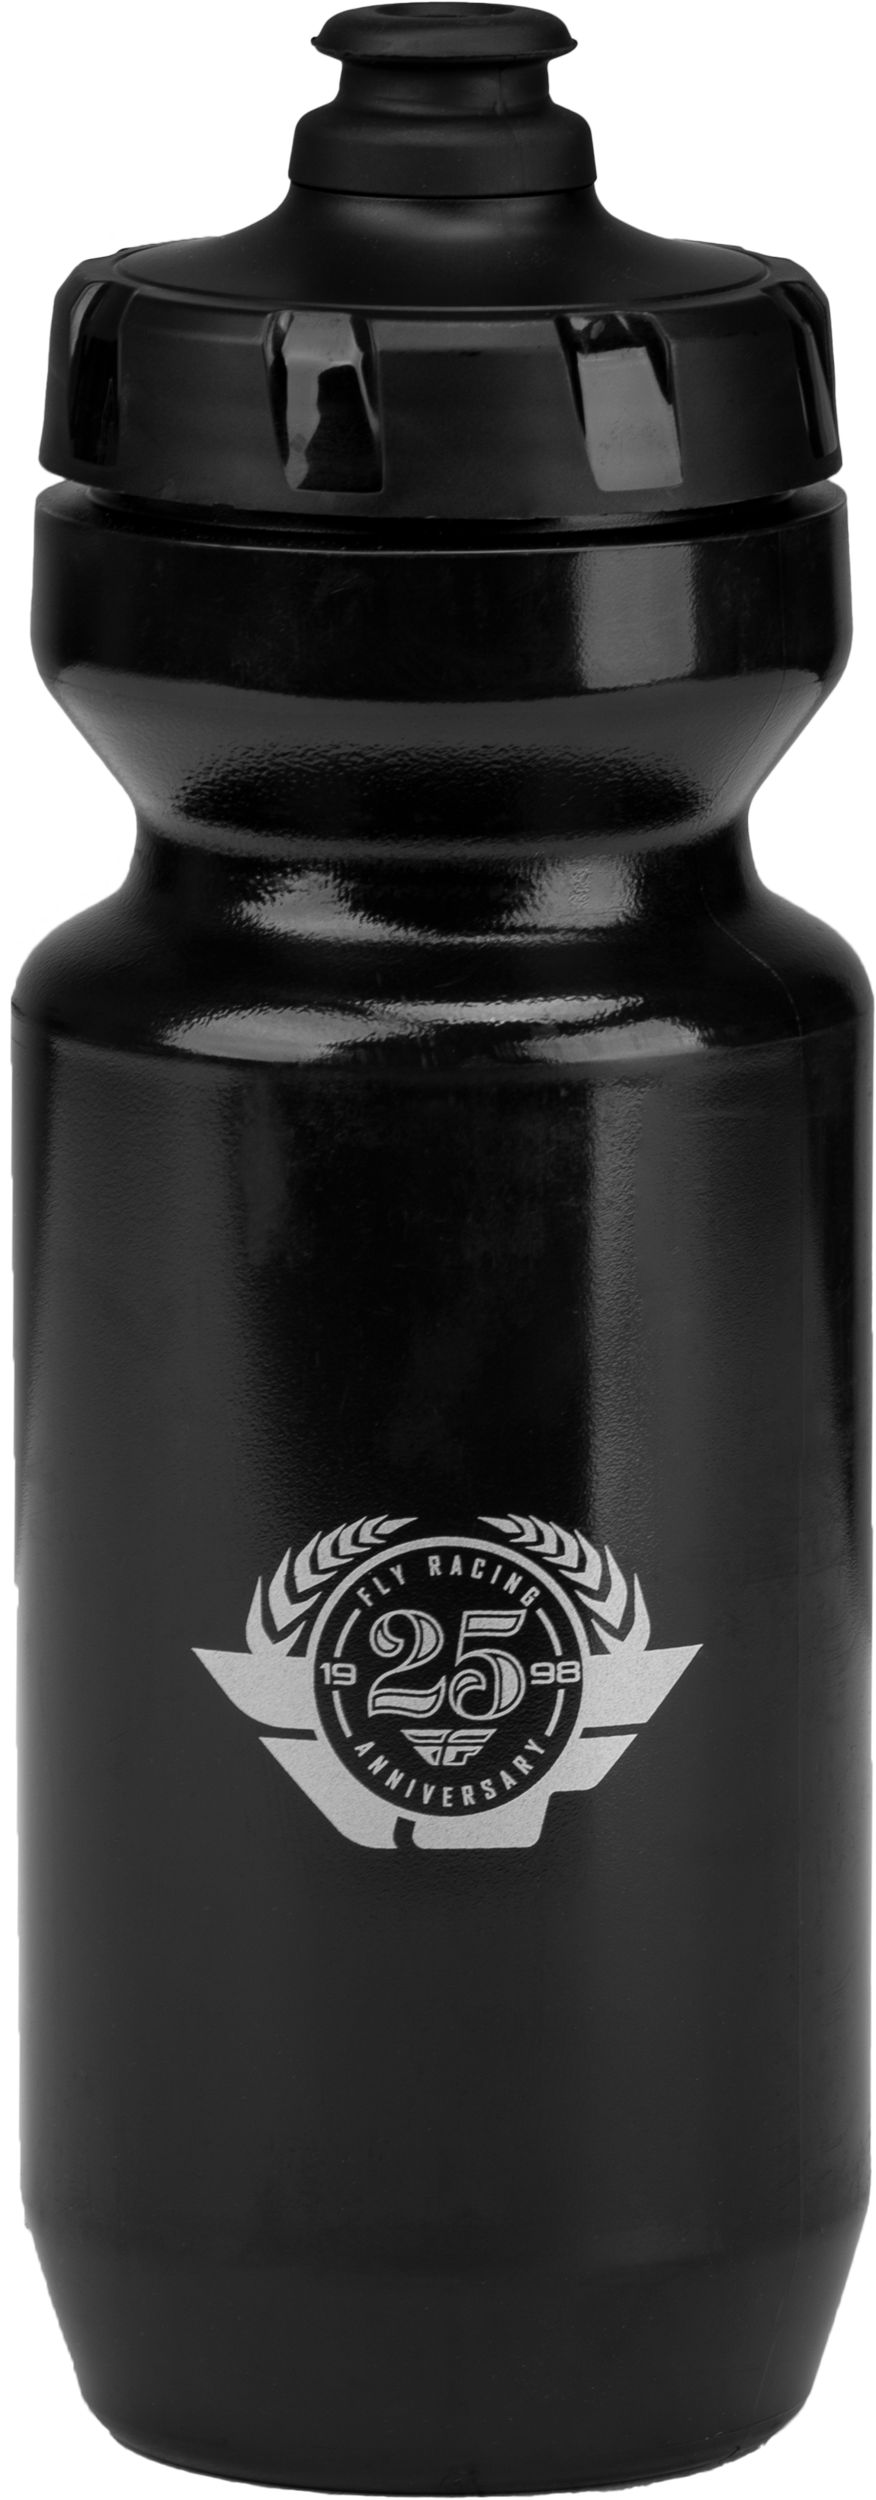 FLY RACING Fly 25th Water Bottle Black/Silver 363-9985